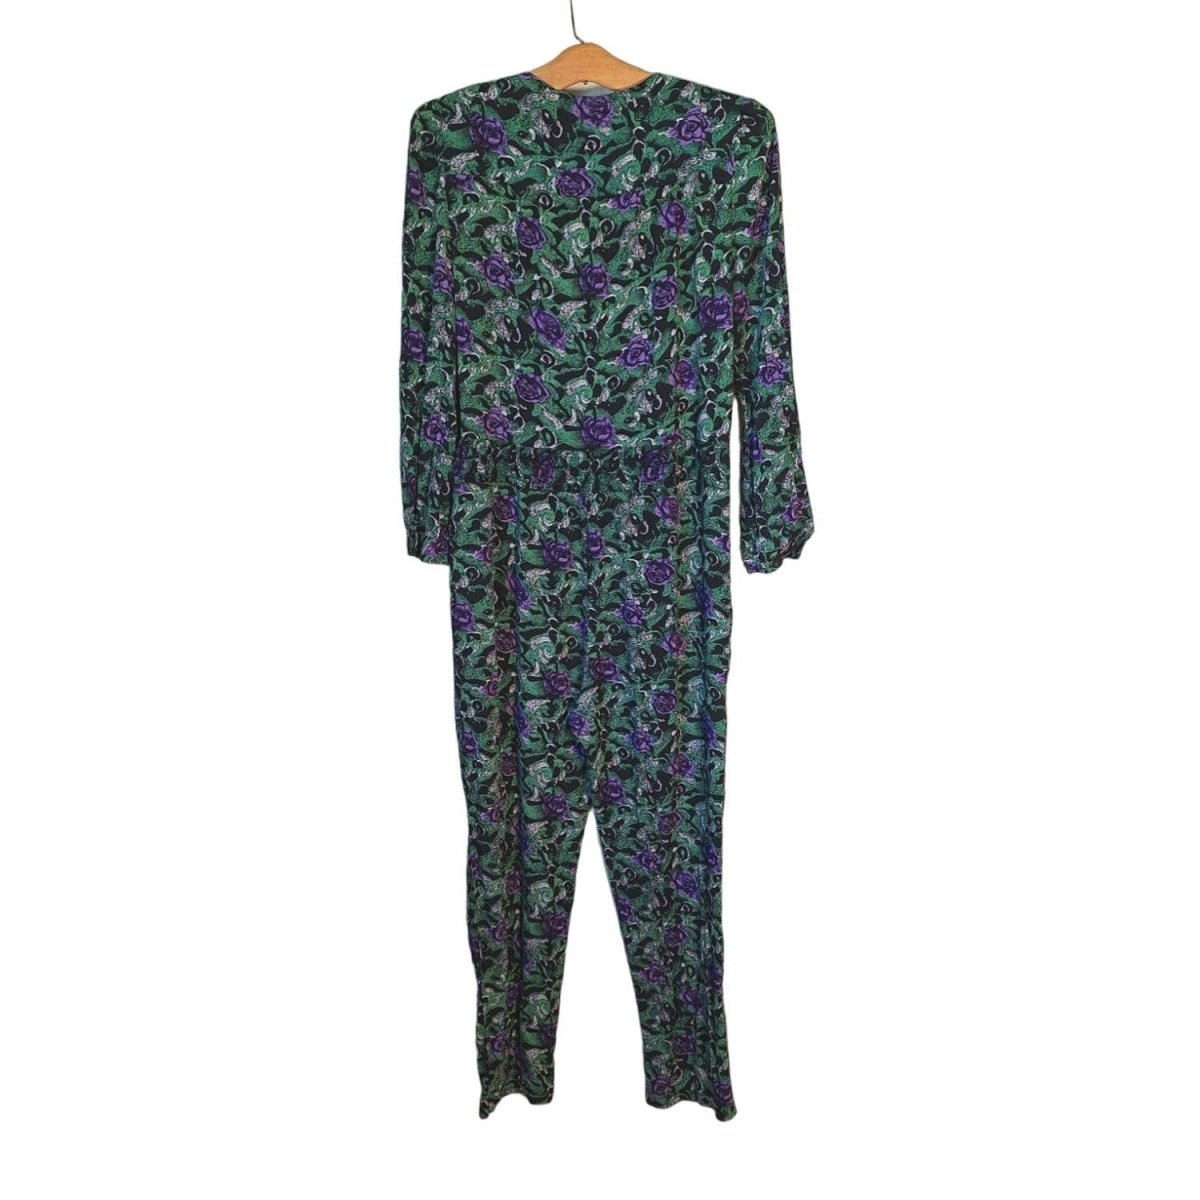 Vintage 80s/90s Purple/Green Rose Print Rayon Jumpsuit Women Size S/M - themallvintage The Mall Vintage